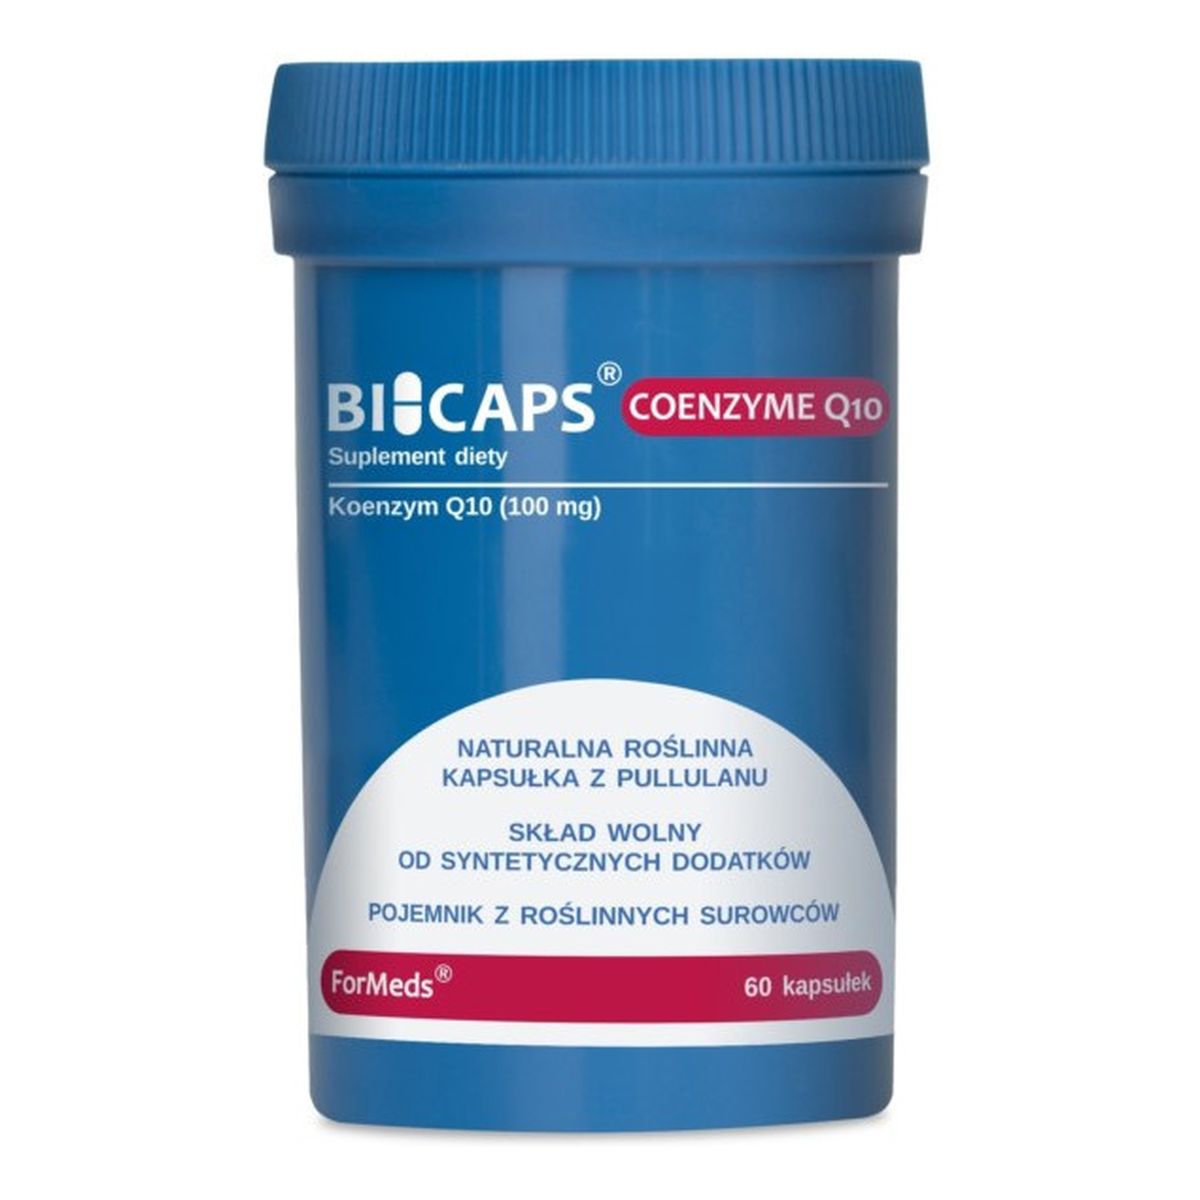 Formeds Bicaps Coenzyme Q10 suplement diety 60 Kapsułek